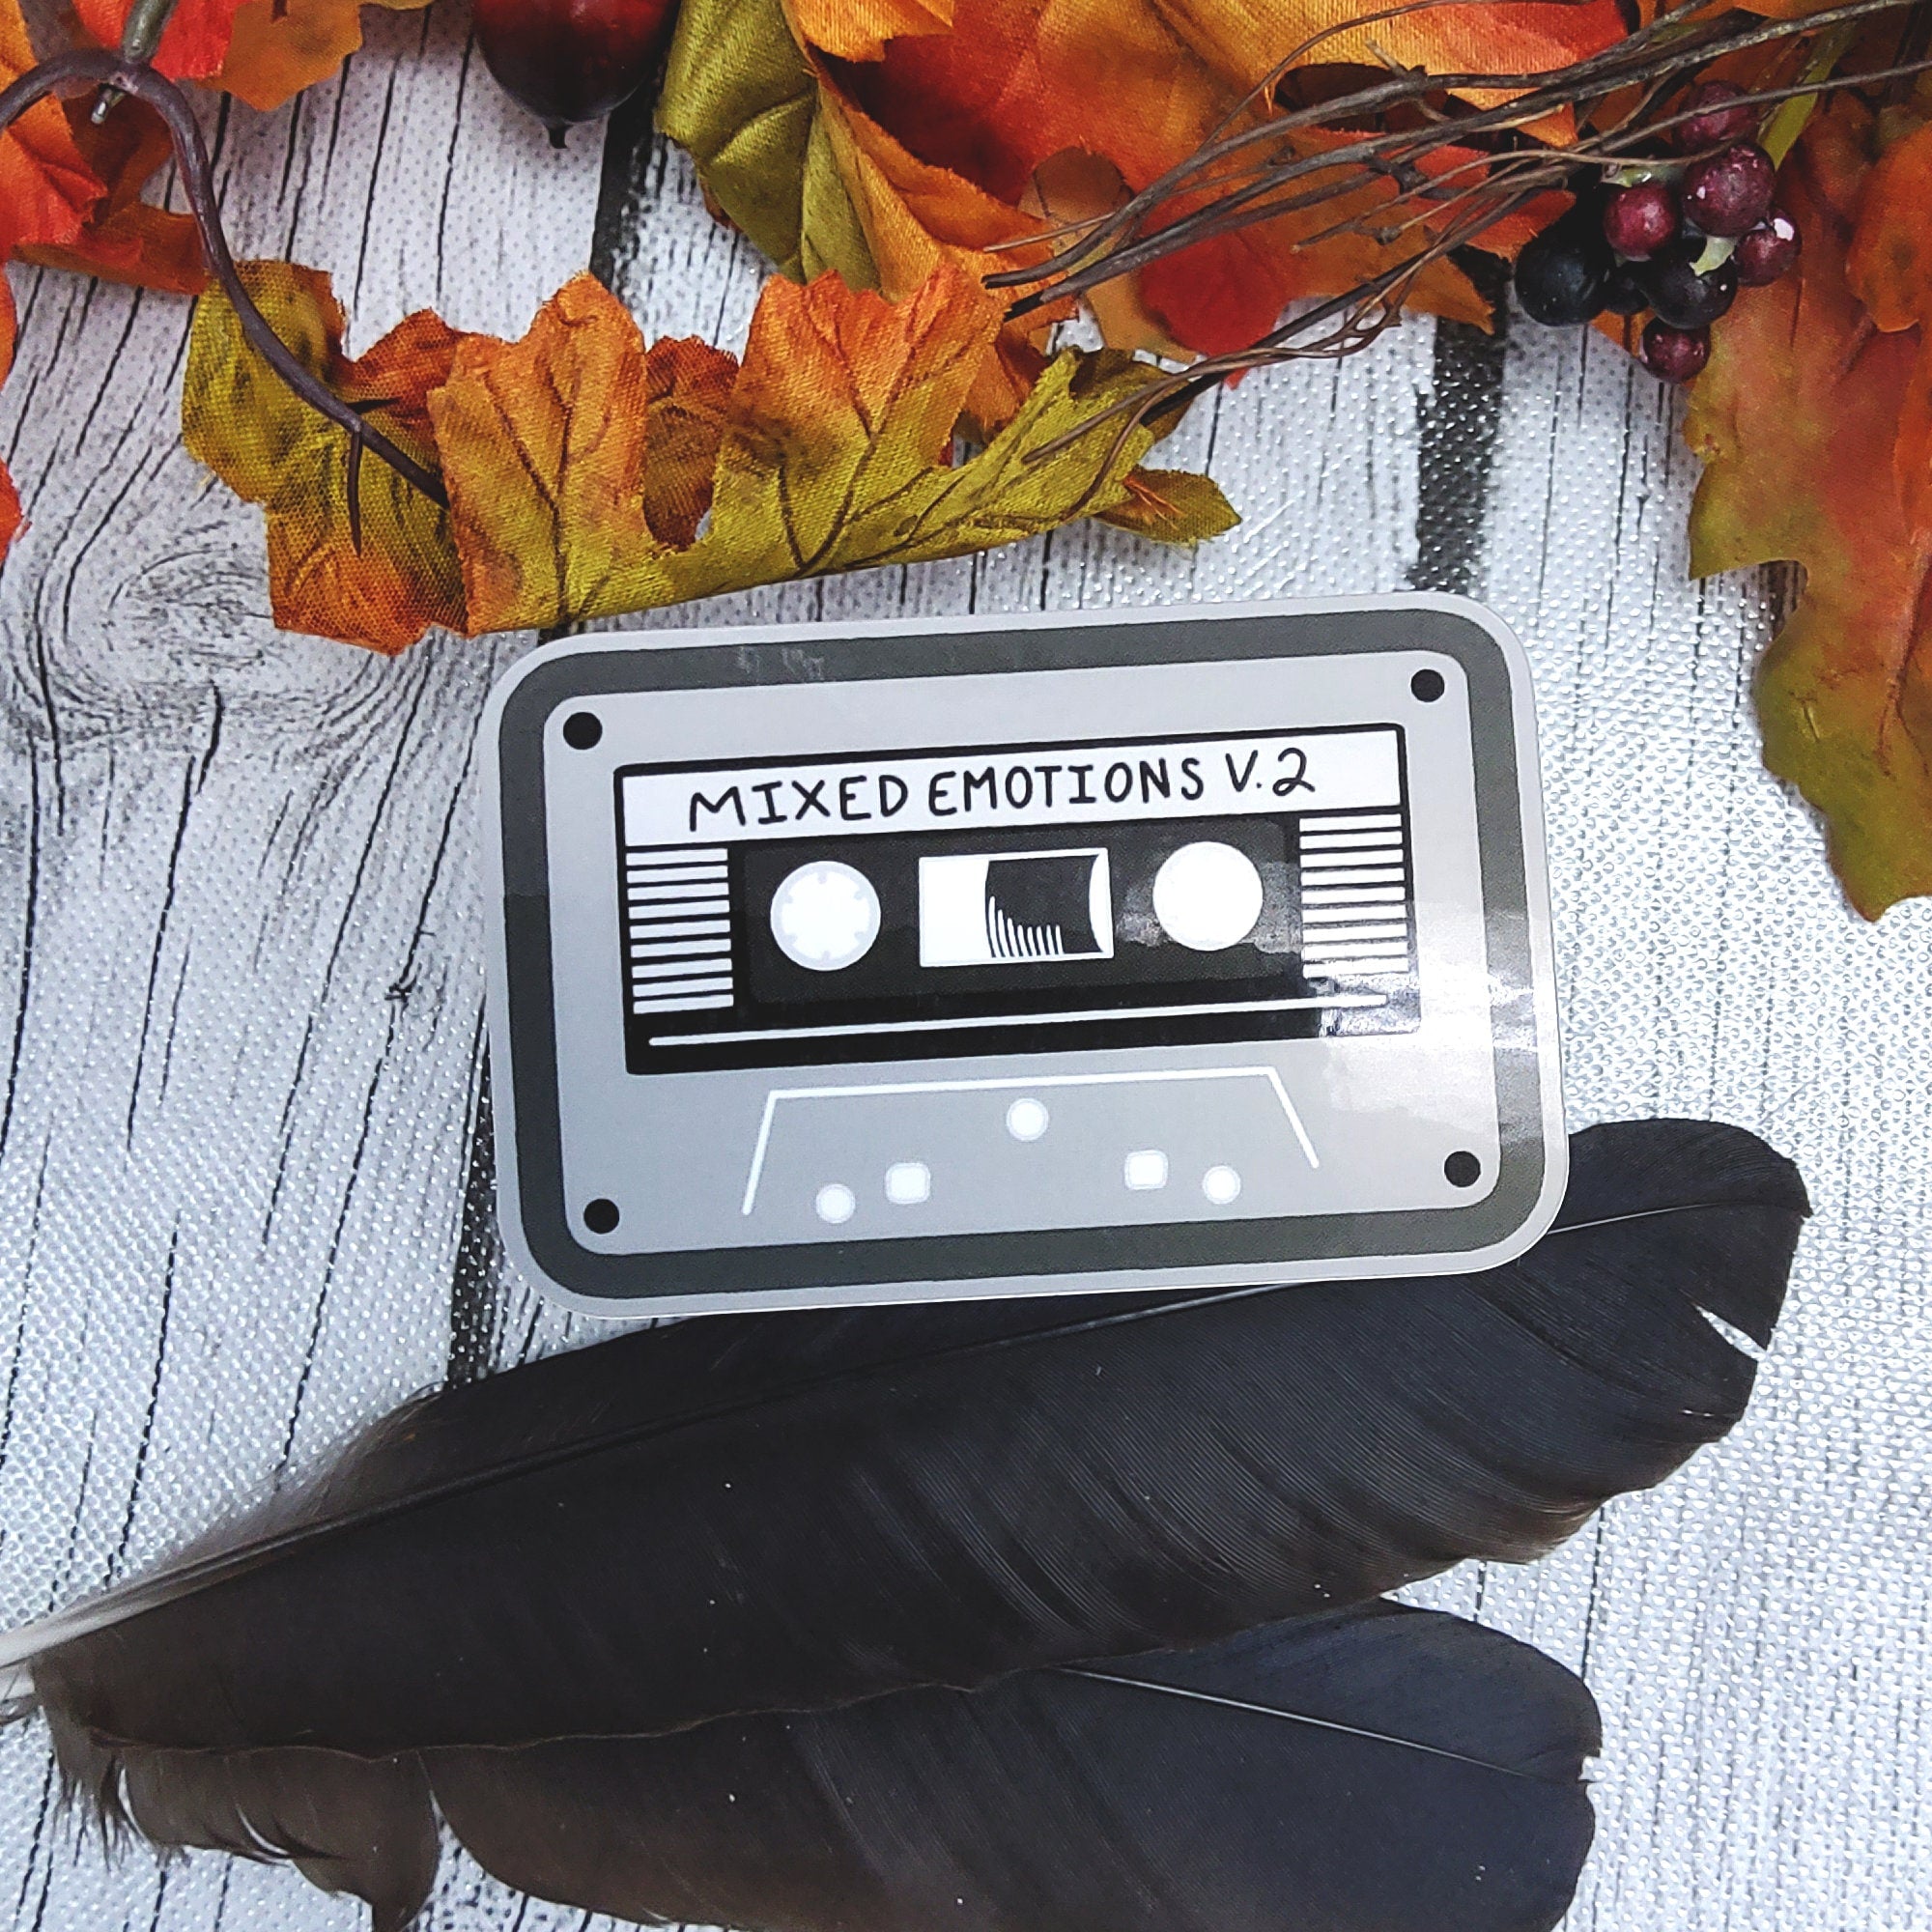 GLOSSY STICKER: Gray Mixed Emotions Volume 2 Cassette Tape Sticker , Cassette Sticker , Mix Tape , Mix Tape Stickers , 80s Vibe Sticker